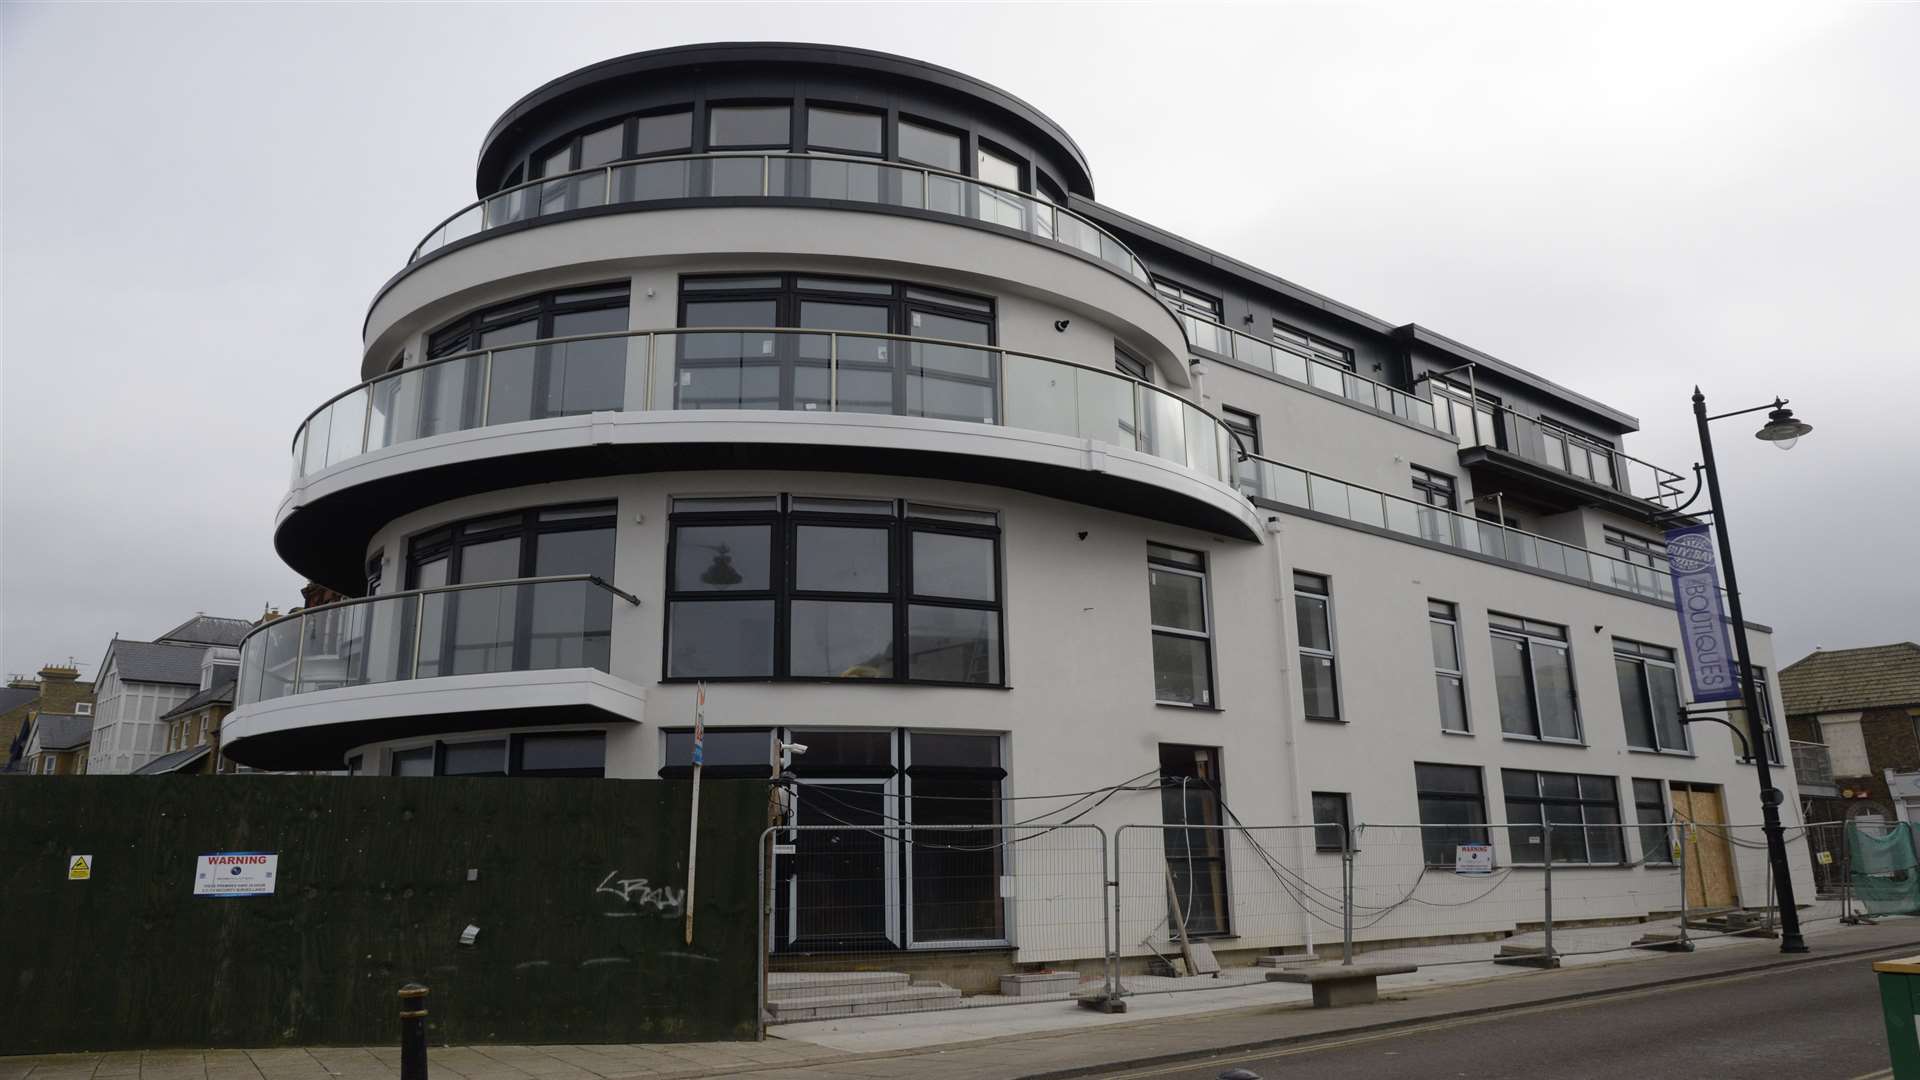 The new seafront apartments still await their first occupants